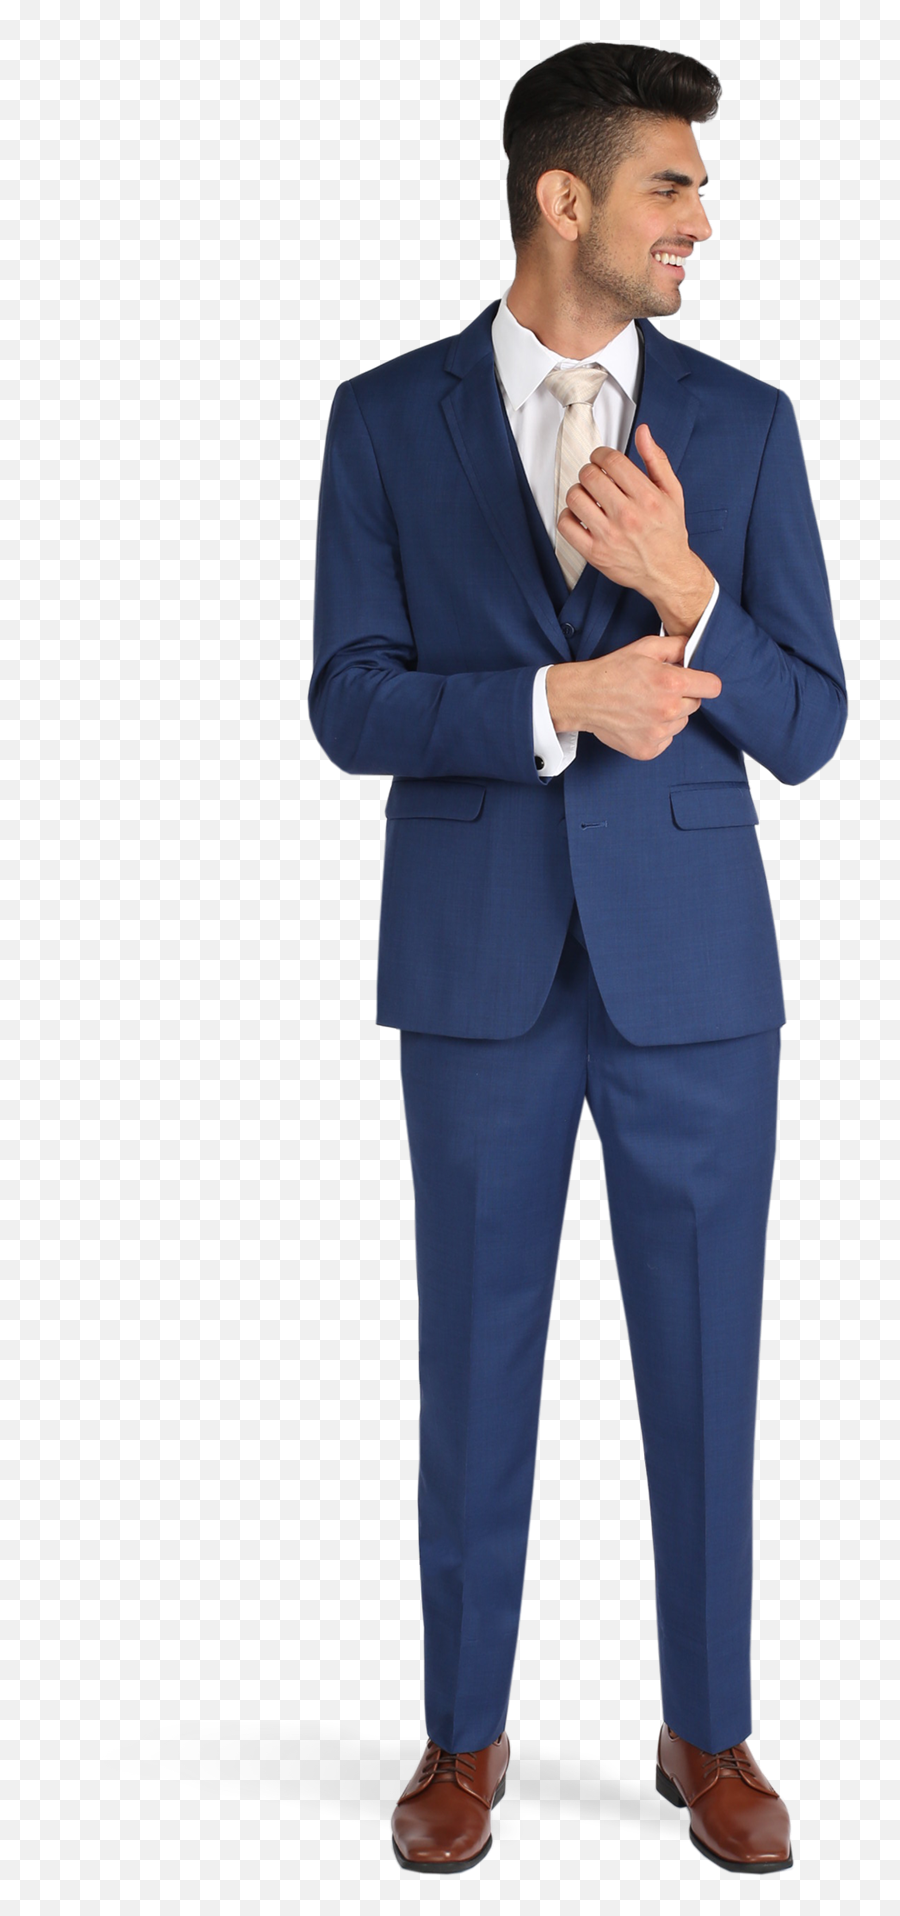 Transparent Suit Png Hd Pictures Free Download - Free Suit,Collar Png